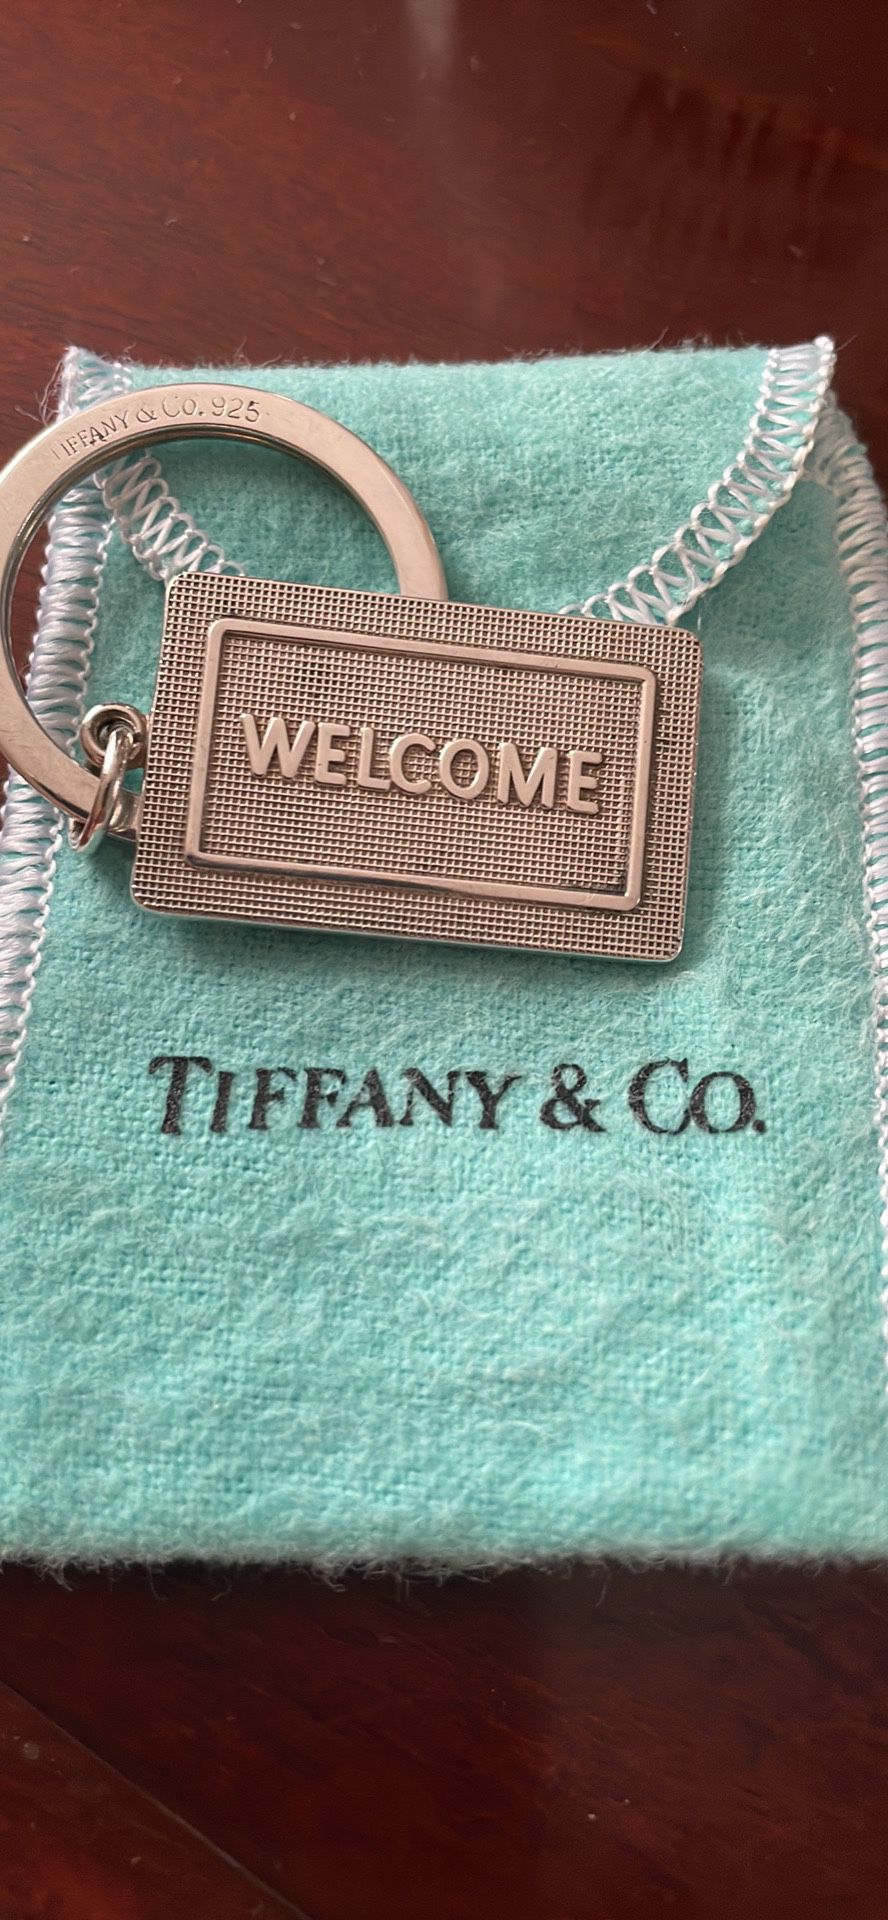 Tiffany & Co Sterling Silver Welcome Mat Key Ring